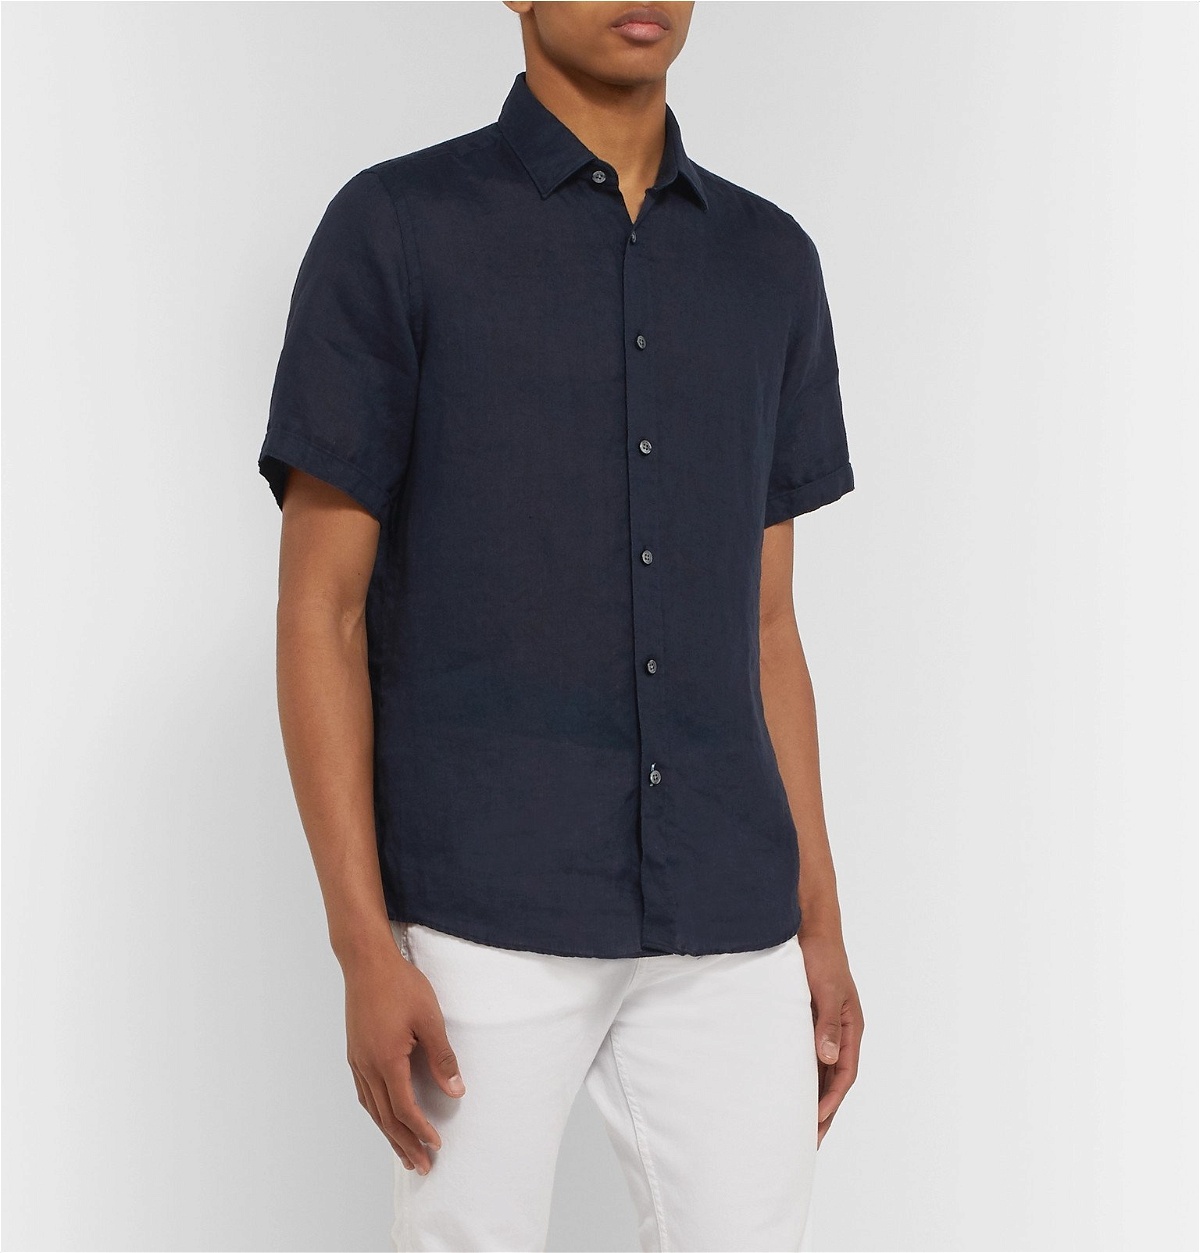 pasta Seaside Respond hugo boss linen shirt navy blue Colonial Lima Try out